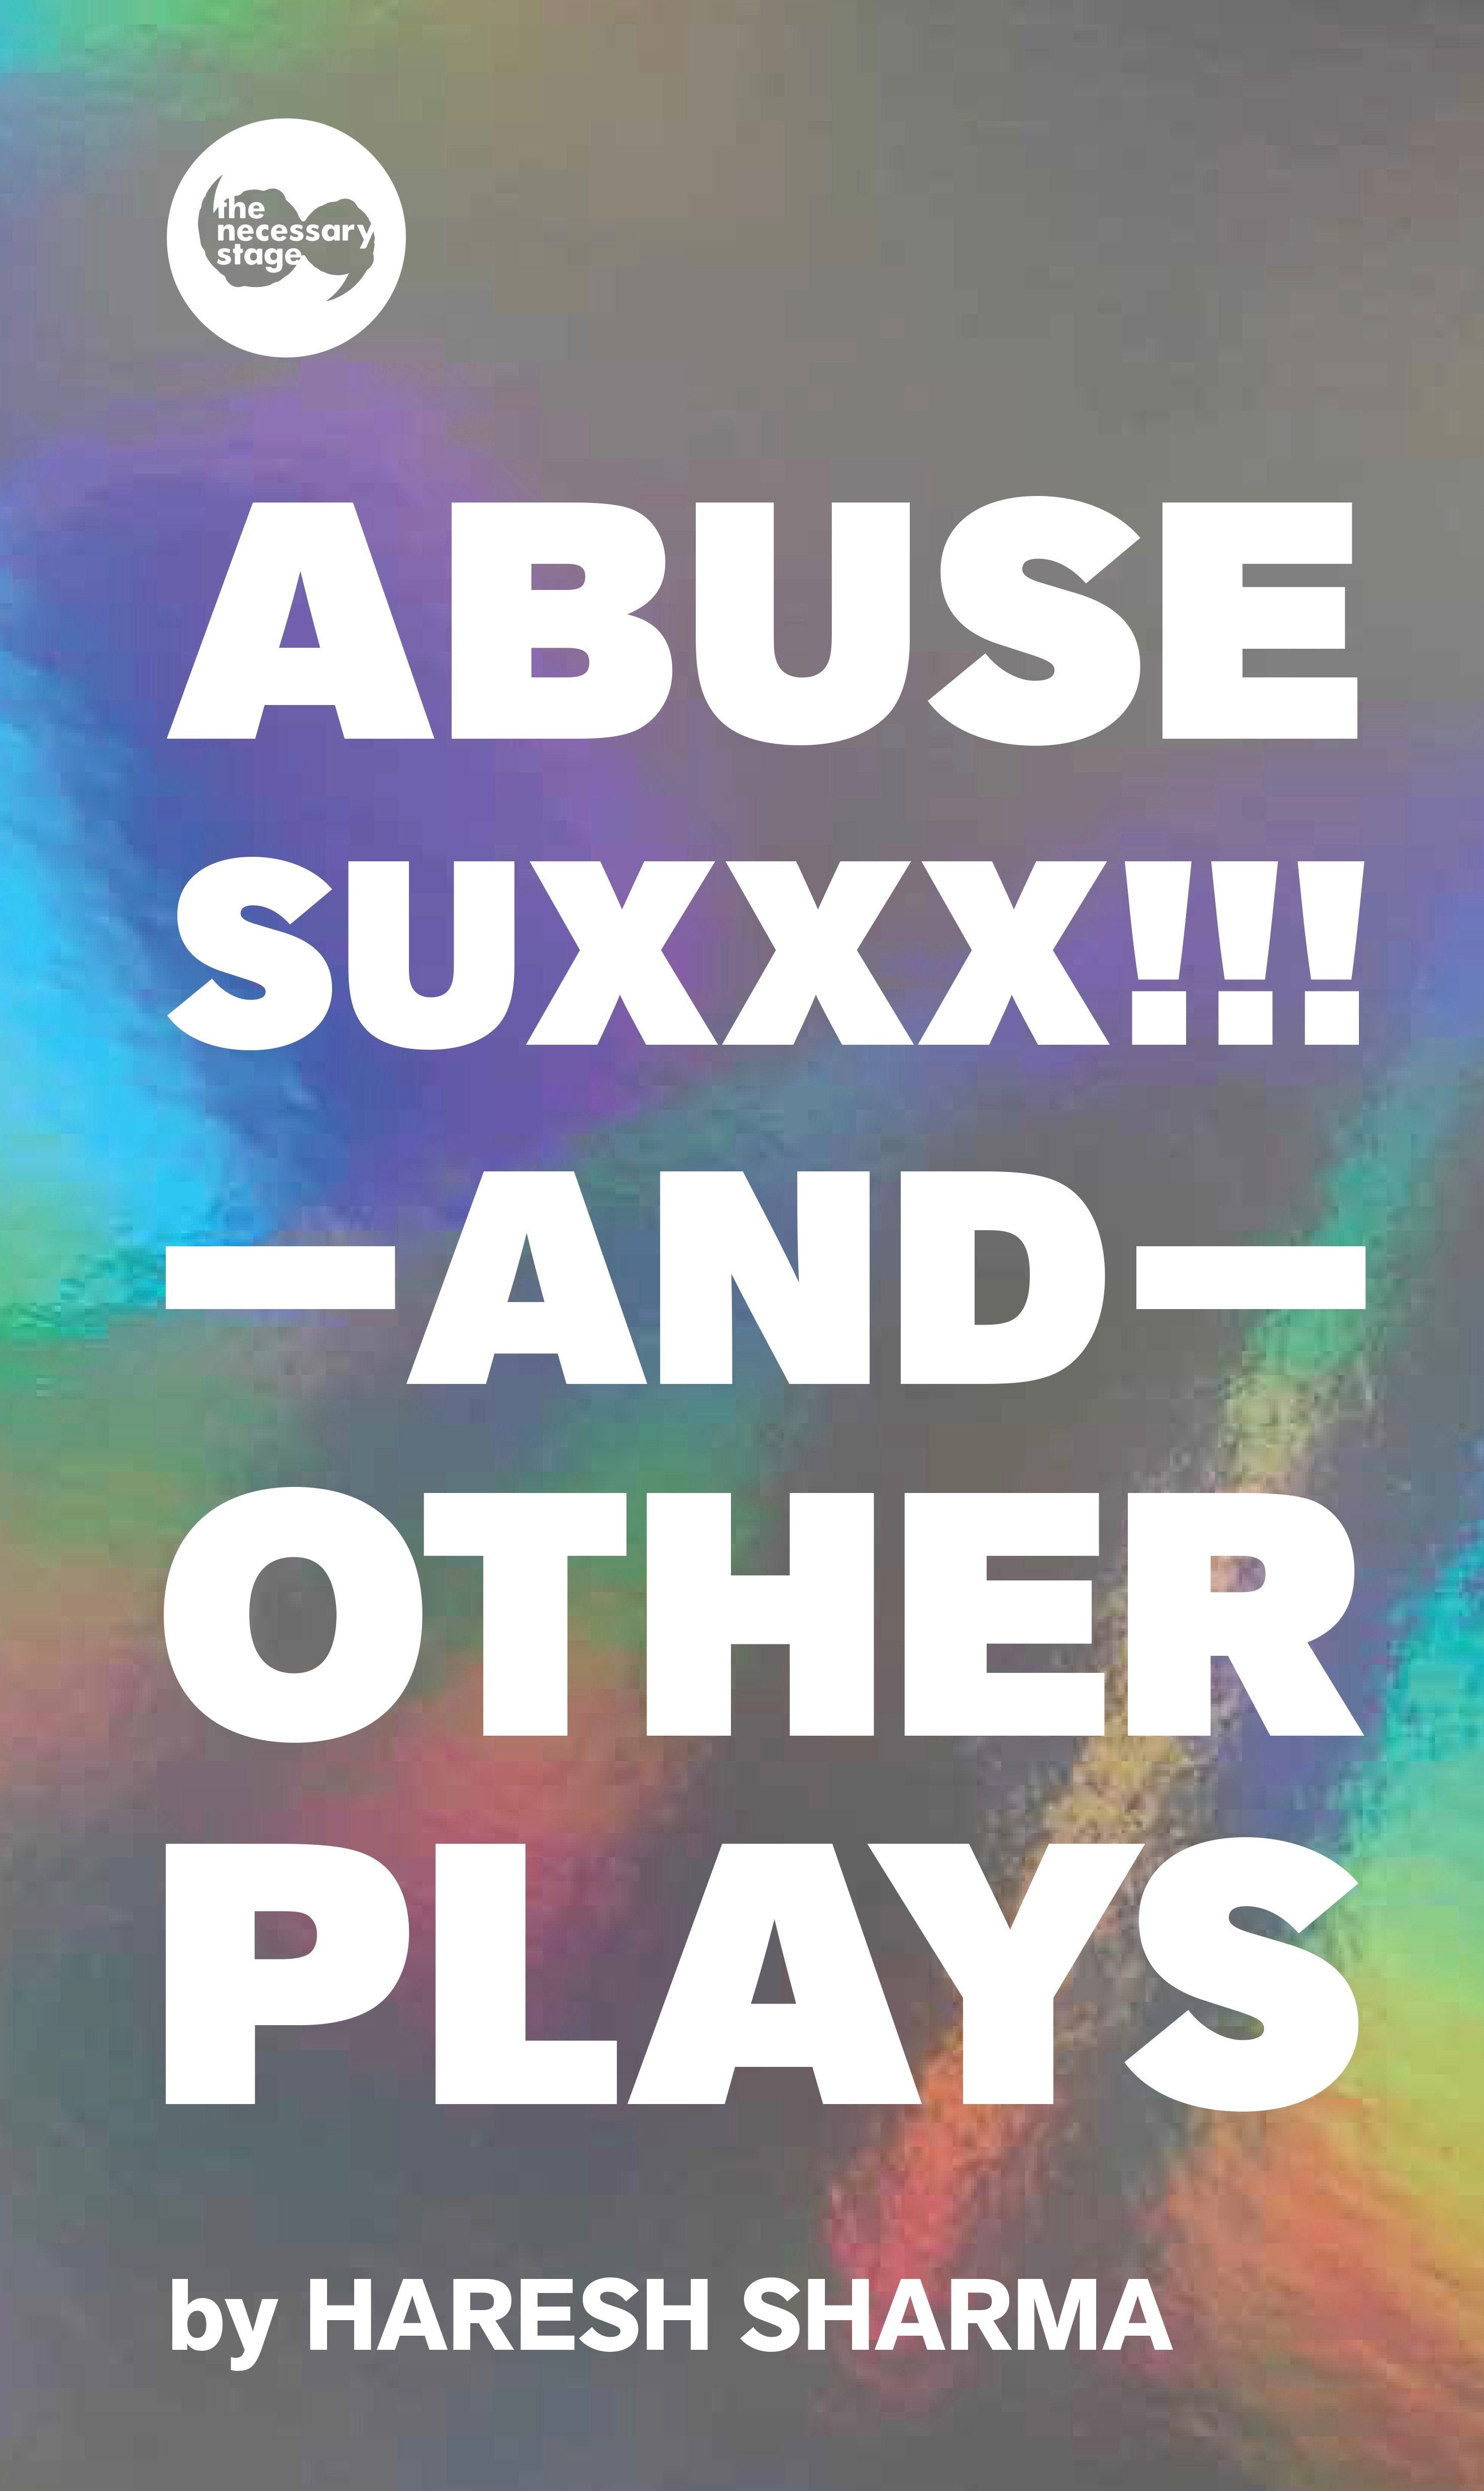 ABUSE SUXXX!!! AND OTHER PLAYS - Localbooks.sg